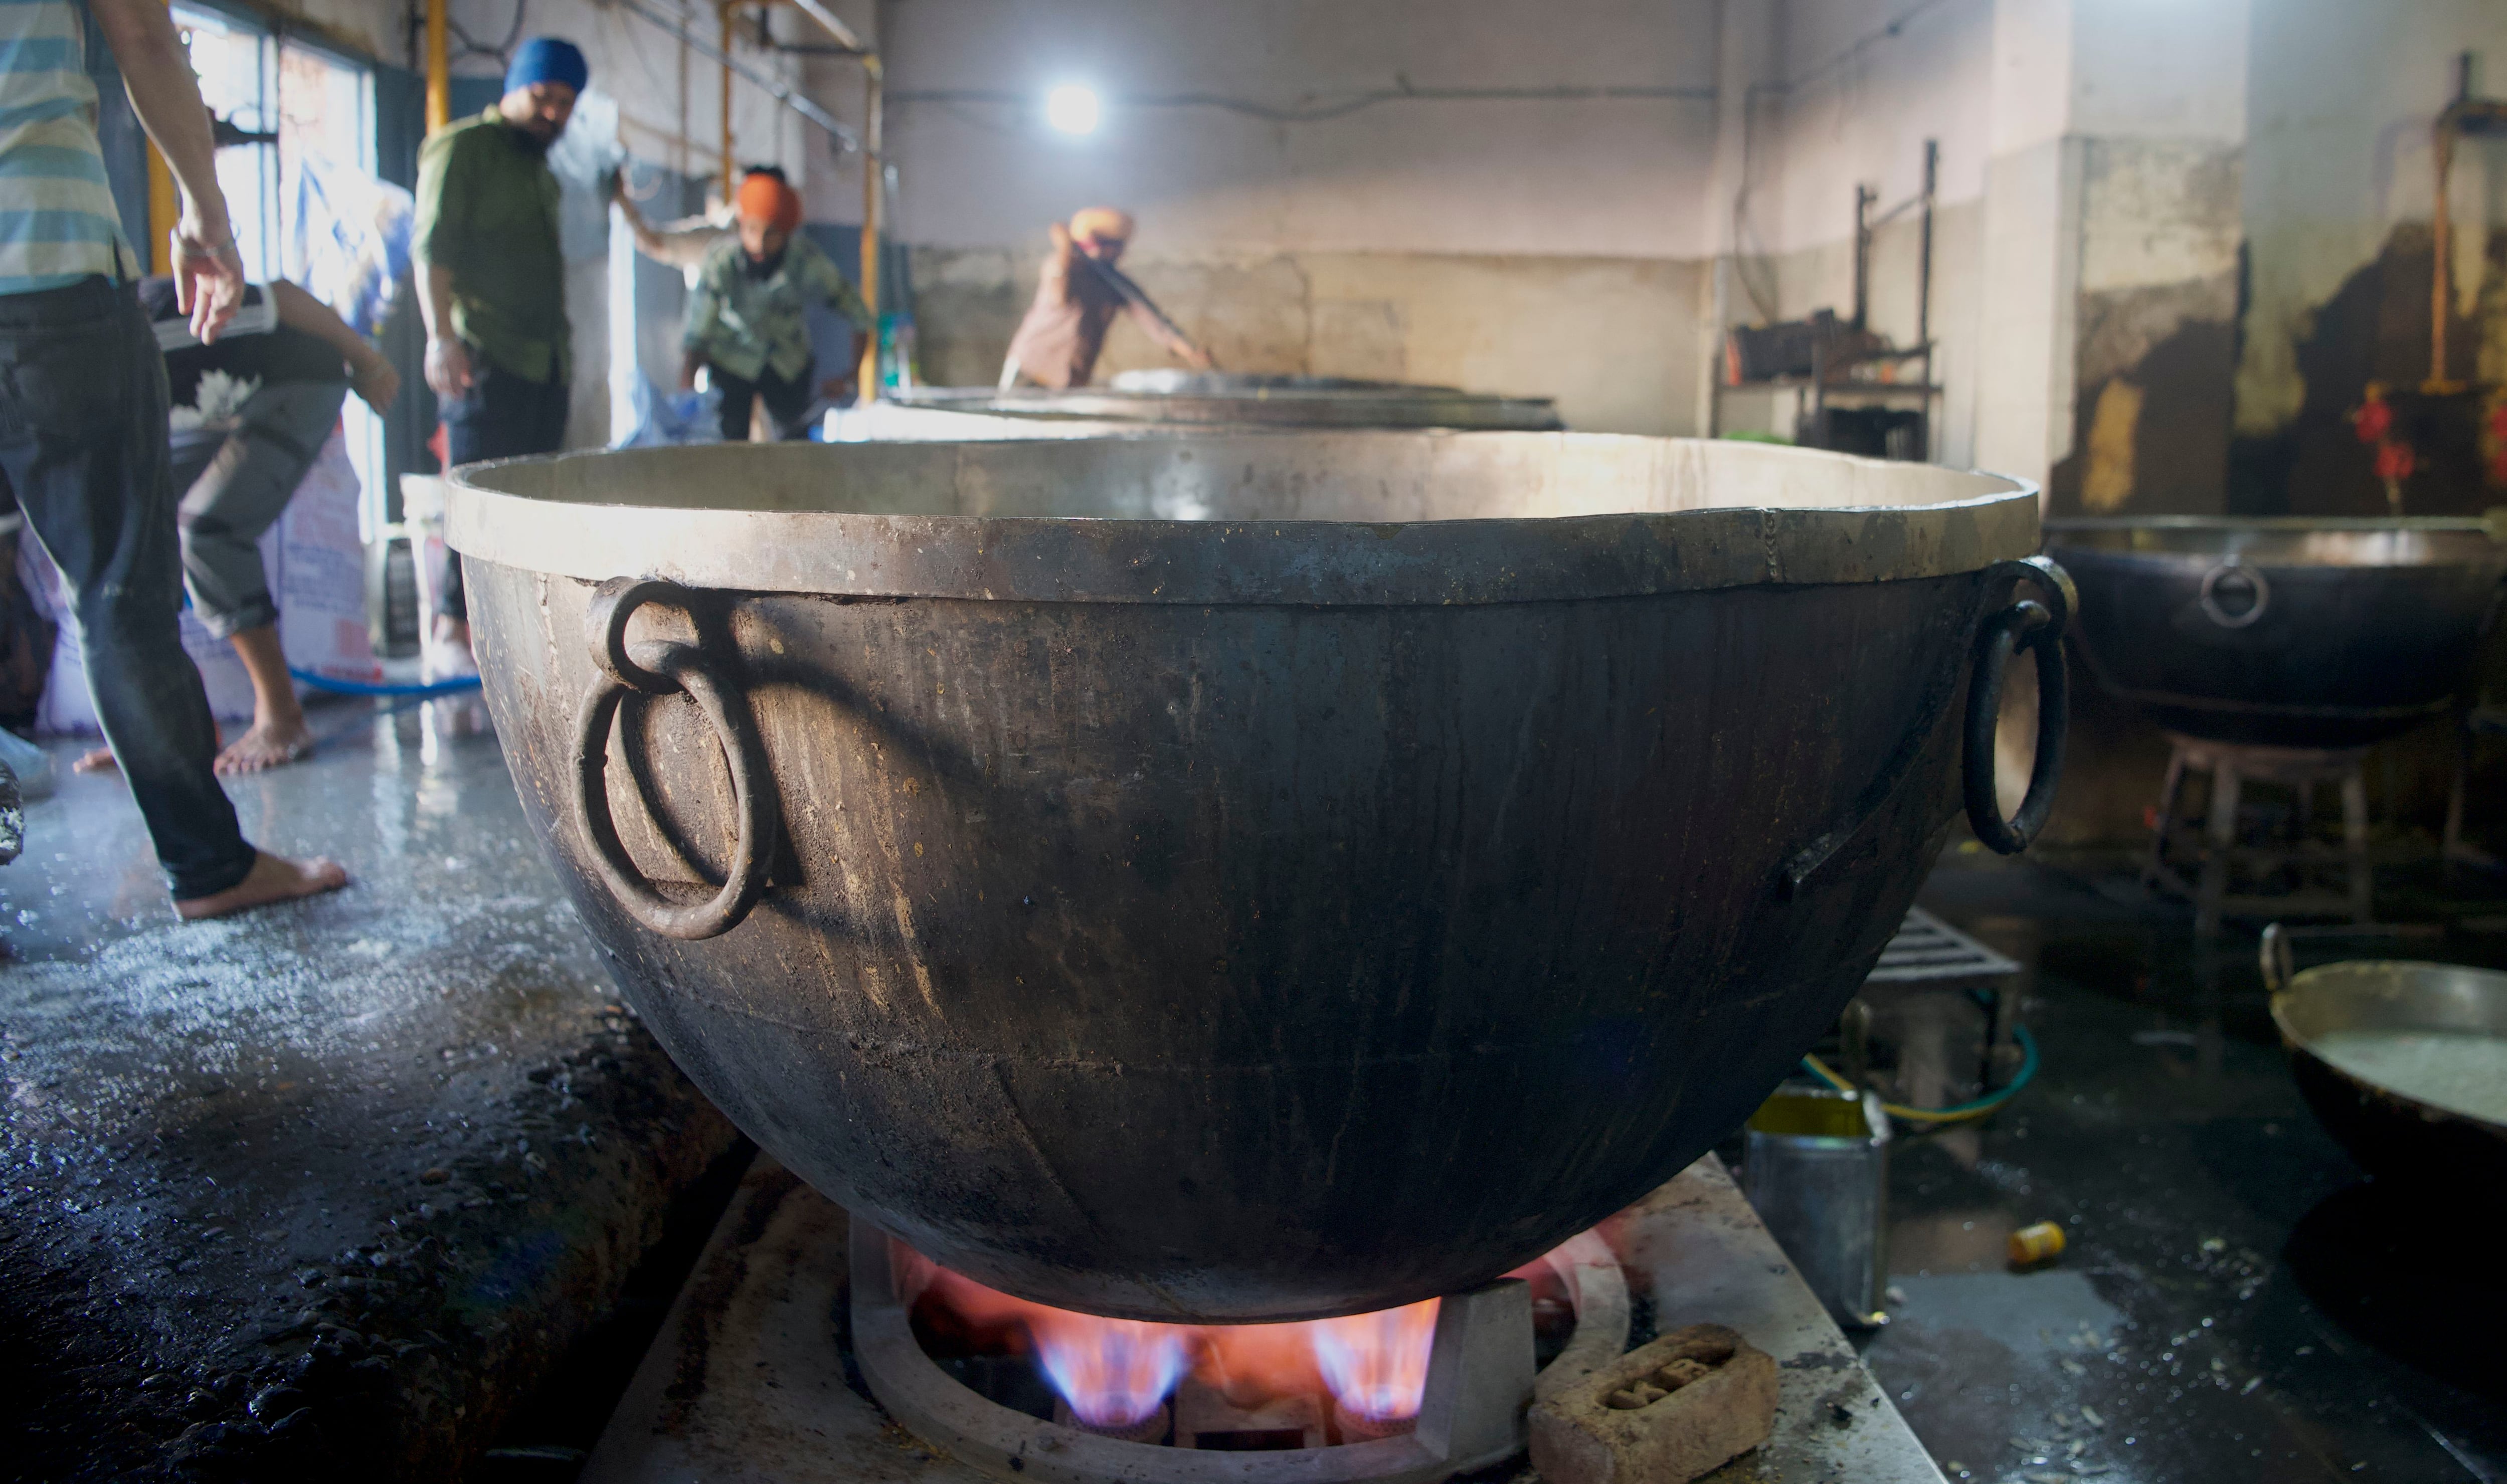 A cook in the Golden Temple cooks in an extremely large pot.